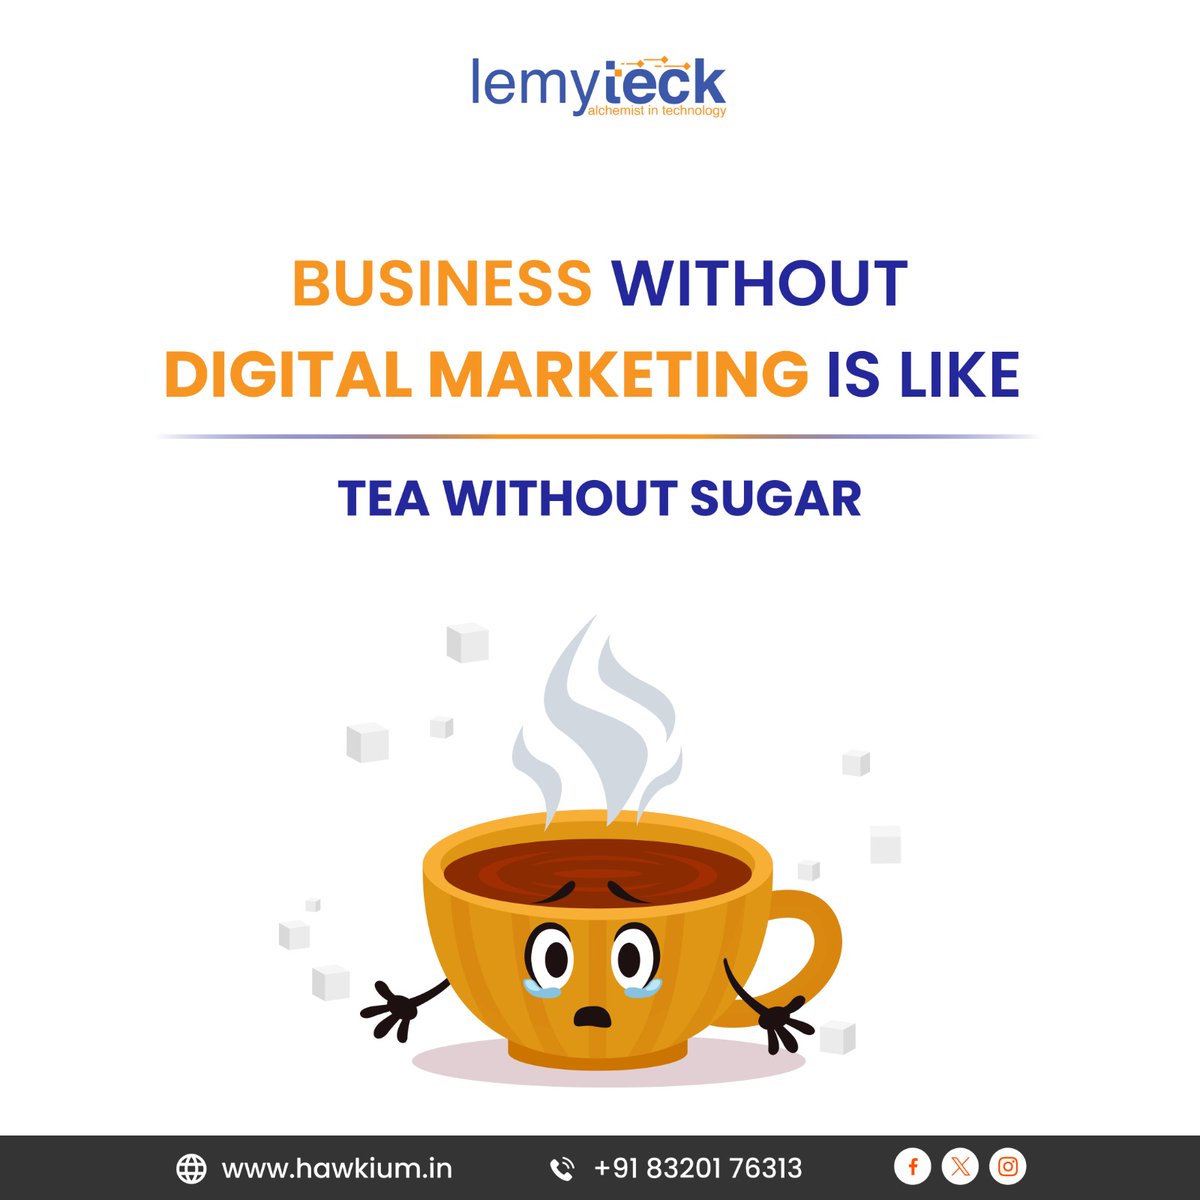 Digital marketing is essential for business 🚀growth. Embrace it to sweeten your brand presence, engage your audience, and ignite success. Don't settle for bland - fuel your business with digital sweetness today!🍵💻 #lemyteck #NZDigitalMarketing #OnlinePresenceNZ